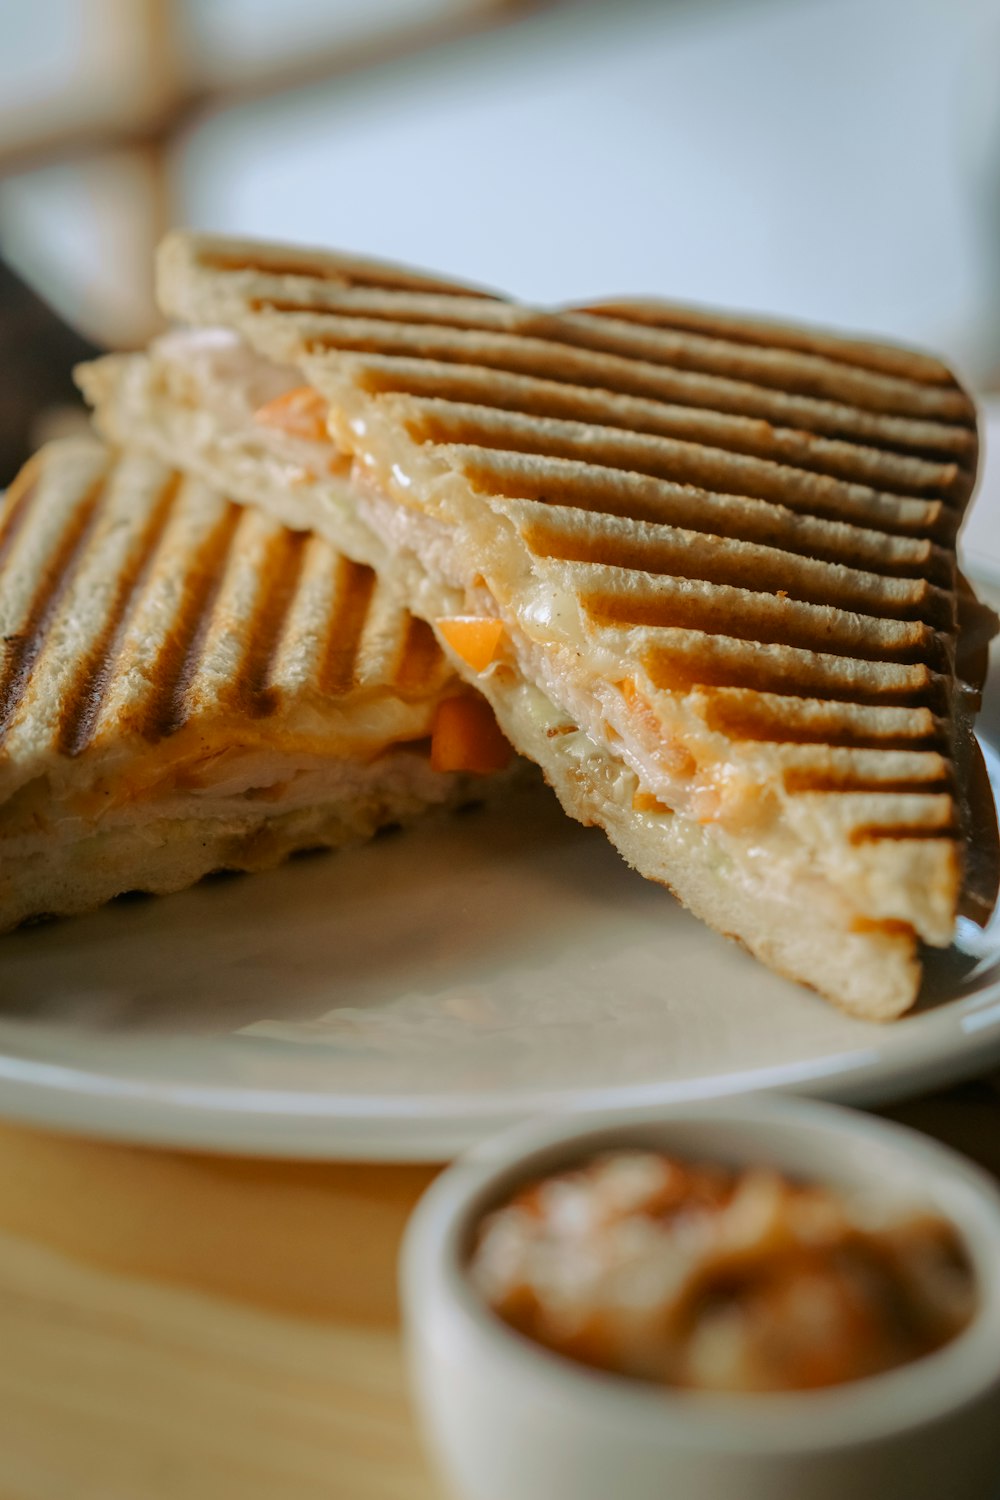 a grilled sandwich on a plate with a bowl of dipping sauce